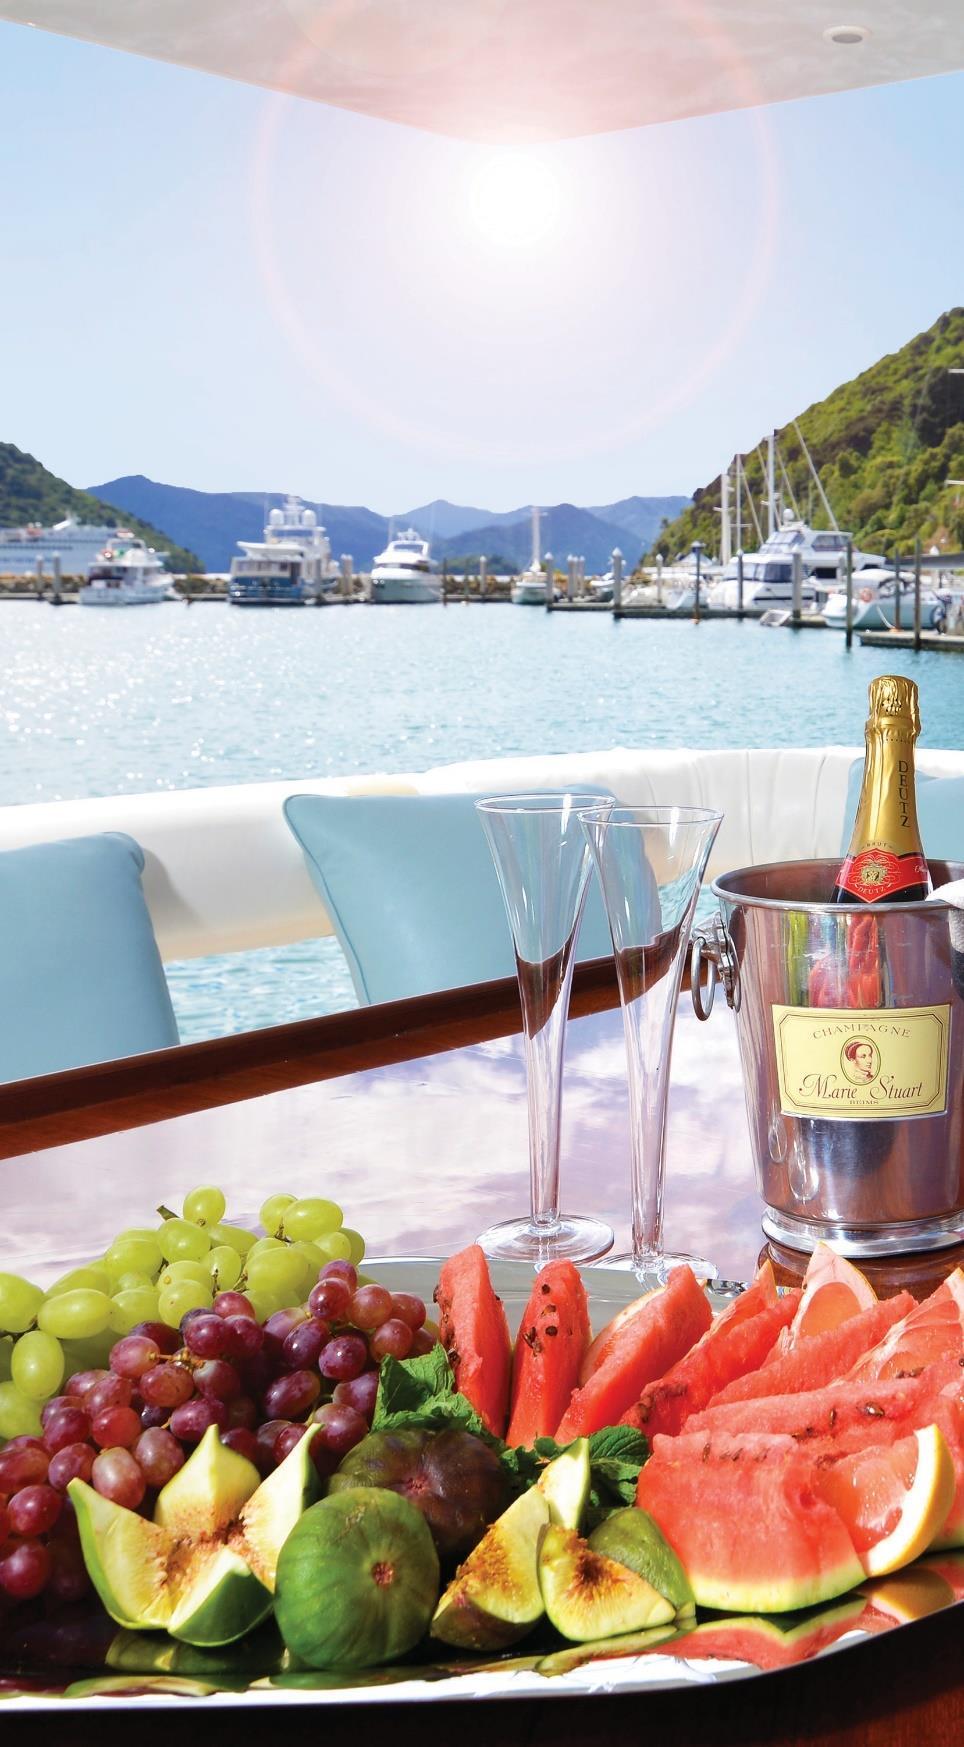 MARLBOROUGH SOUNDS CRUISE PACKAGES RETAIL RATES SCHEDULE - GST INCL @ 15% NUMBER OF GUESTS CRUISE DURATION 1 APR 2017 31 MAR 2019 RETAIL PRICING HALF DAY AND FULL DAY CRUISES MARLBOROUGH SOUNDS 1-8